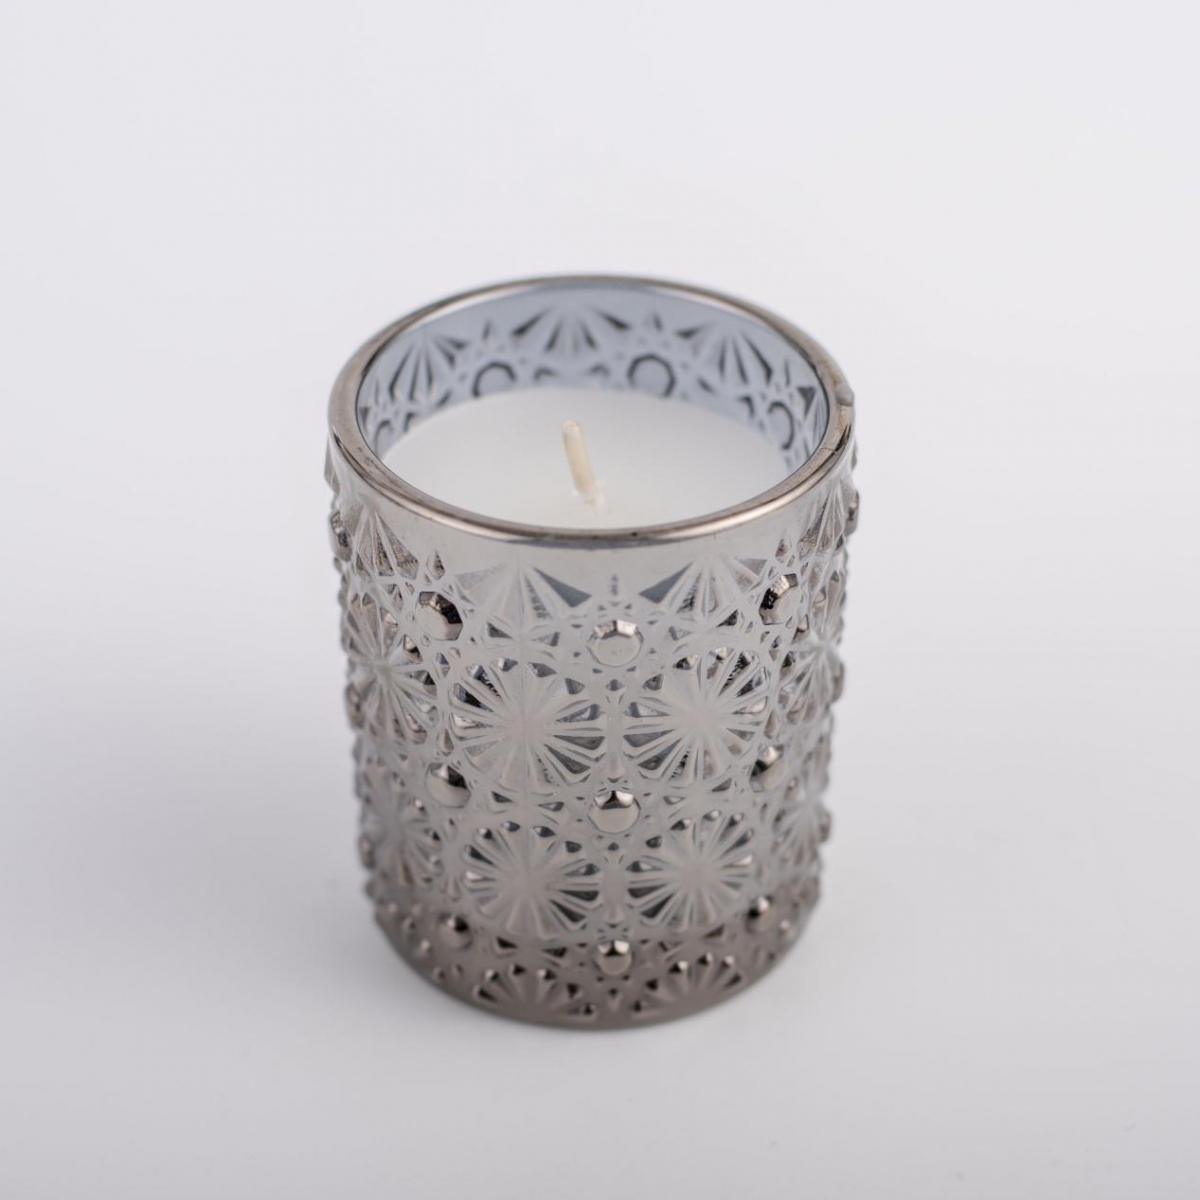 Aromatherapy Candles In Glass Jar : Best Sellers 3 Small Candle Set ,Smoke Grey ,Snowflake Candle Jar, China Factory ,Price-HOWCANDLE-Candles,Scented Candles,Aromatherapy Candles,Soy Candles,Vegan Candles,Jar Candles,Pillar Candles,Candle Gift Sets,Essential Oils,Reed Diffuser,Candle Holder,